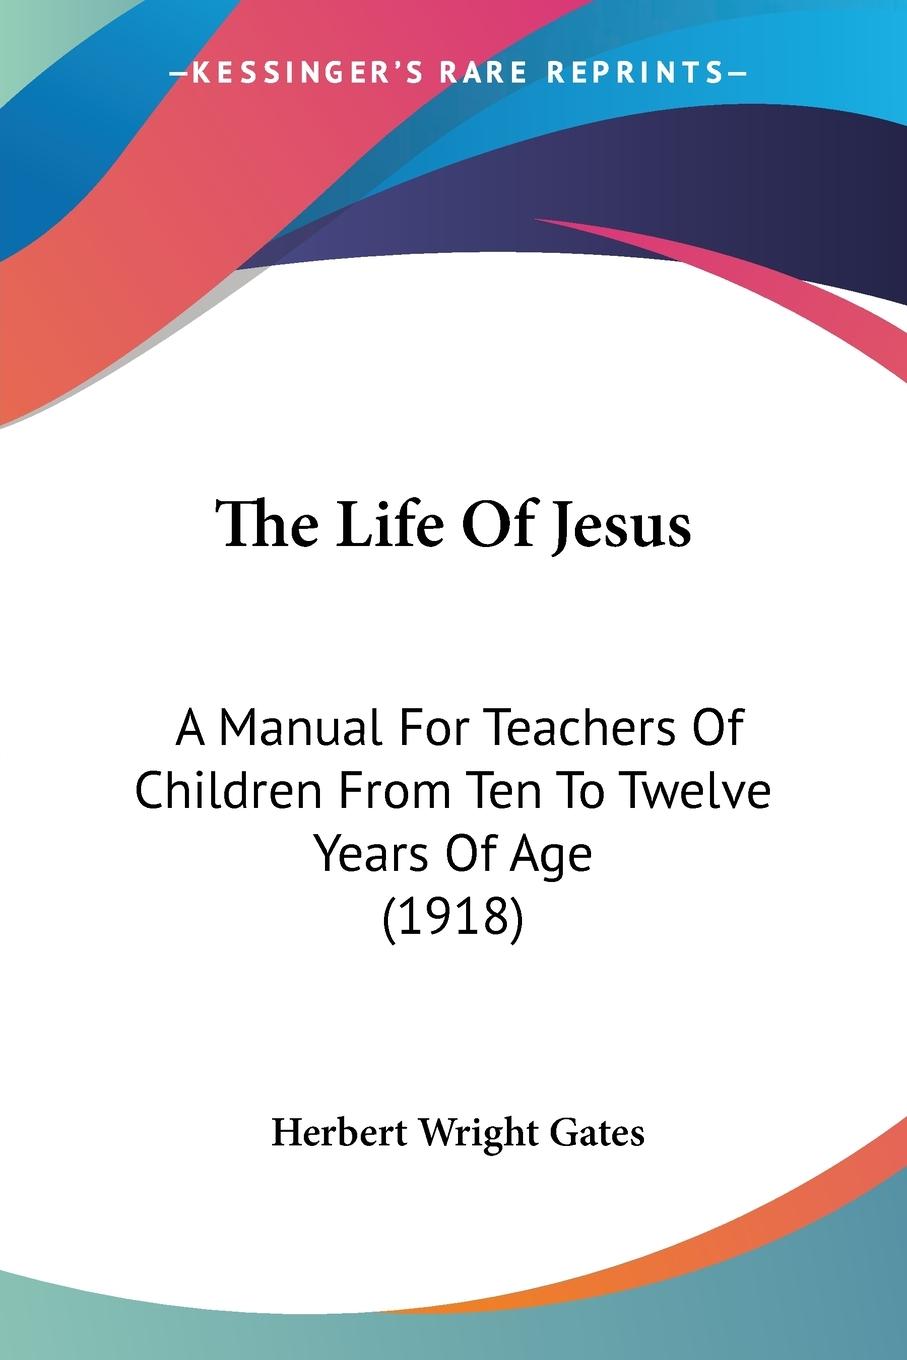 The Life of Jesus: A Manual for Teachers of Children from Ten to Twelve Years of Age (1918)